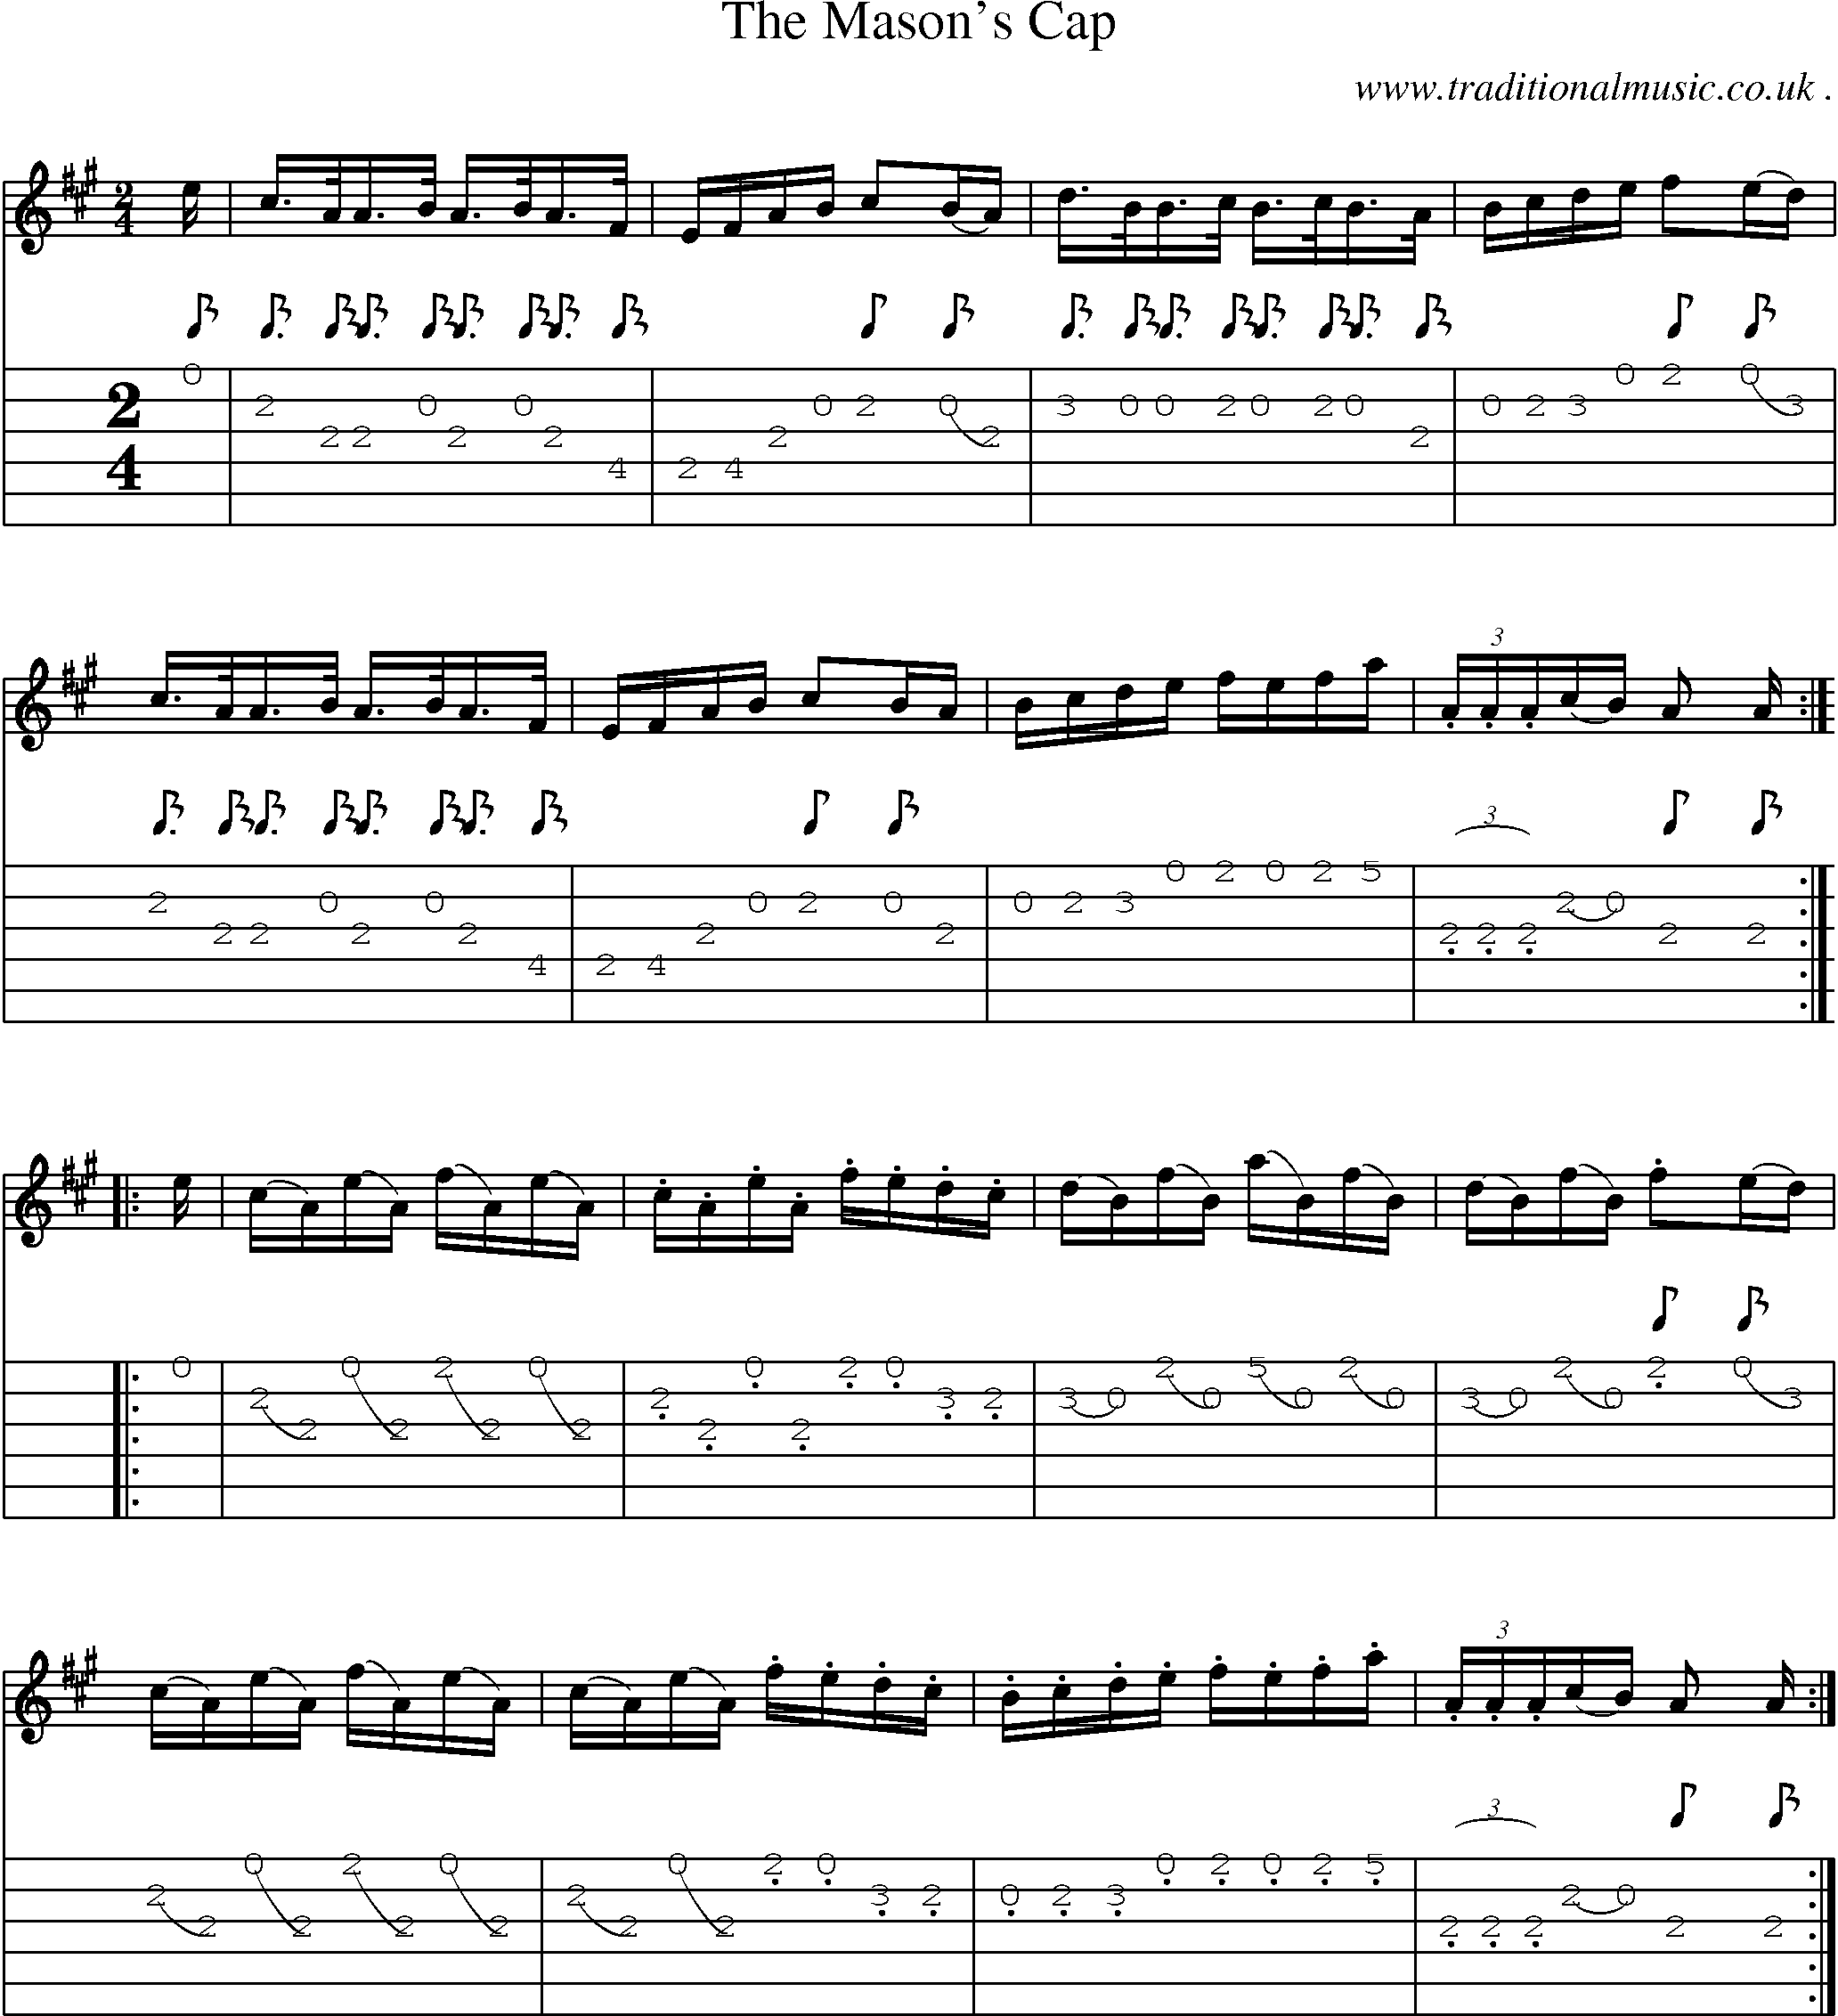 Sheet-Music and Guitar Tabs for The Masons Cap